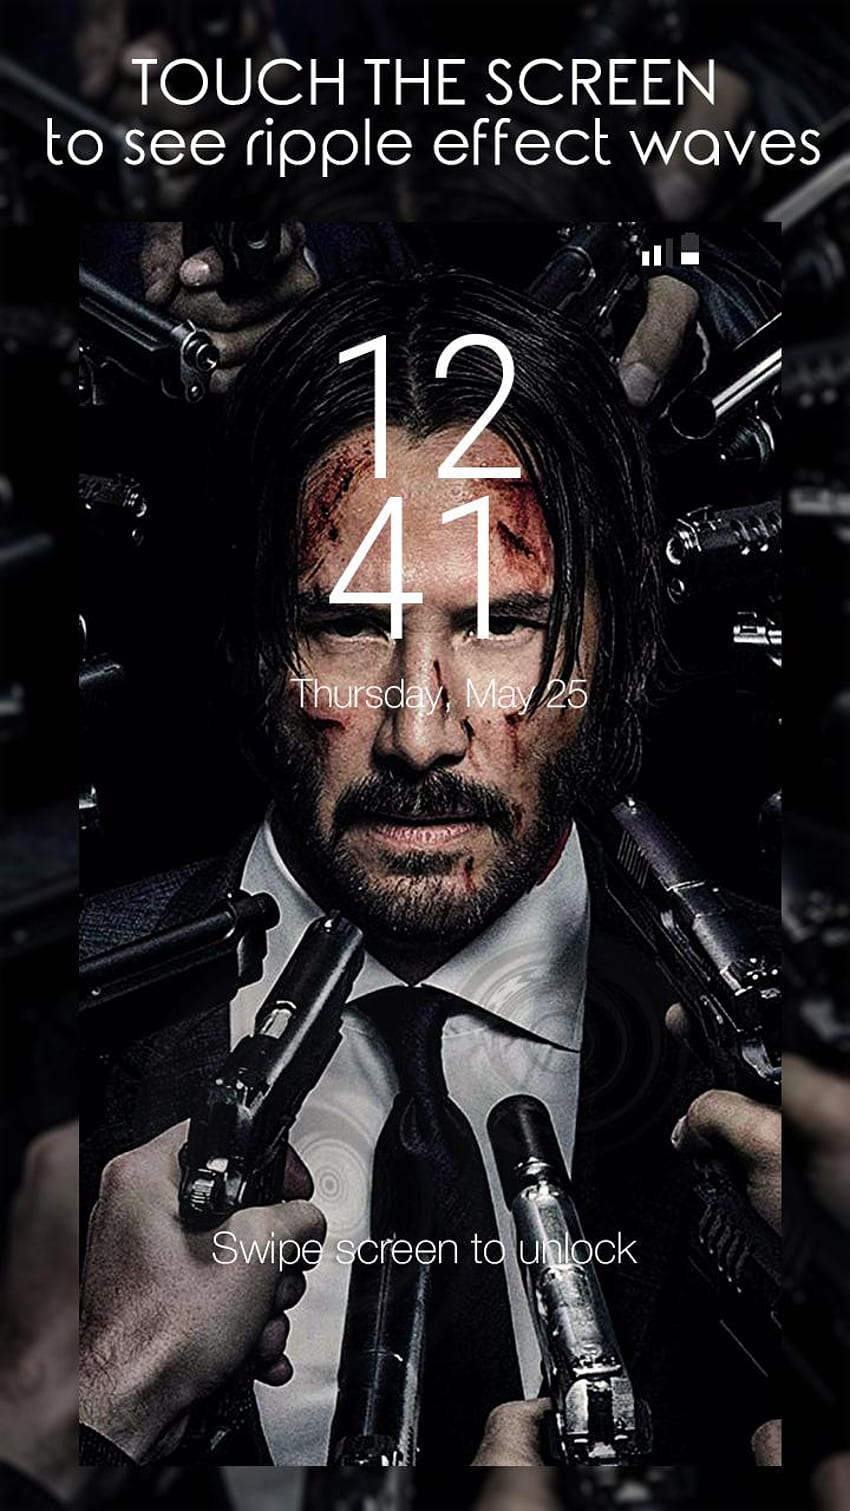 1920x1080px, 1080P Free download | John Wick Live for Android, Cool